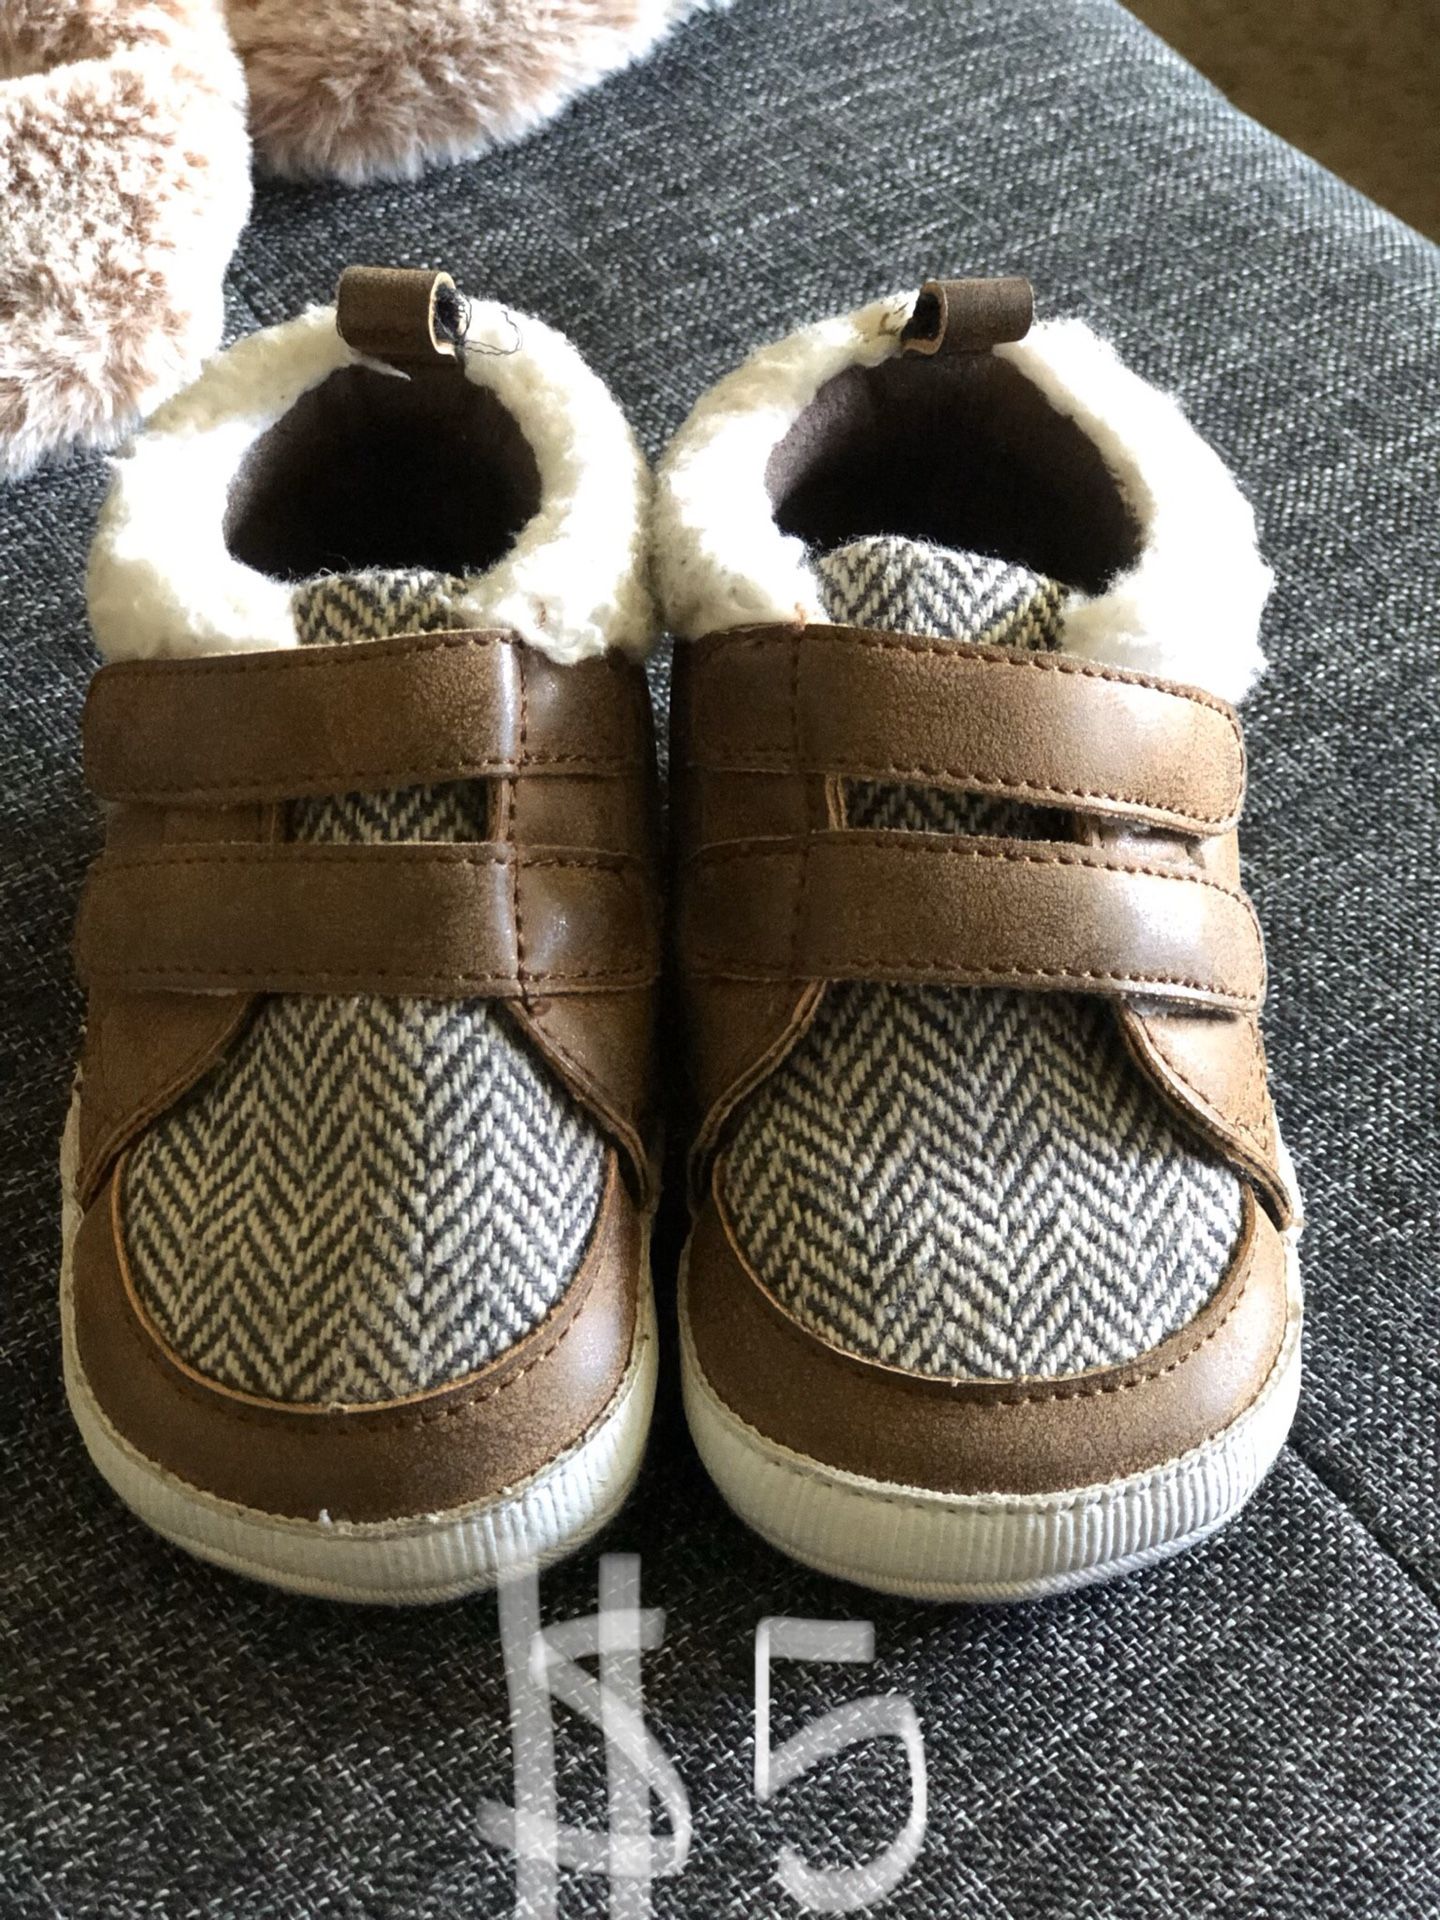 Baby toddler shoes size 4 or size 12 months crib shoes